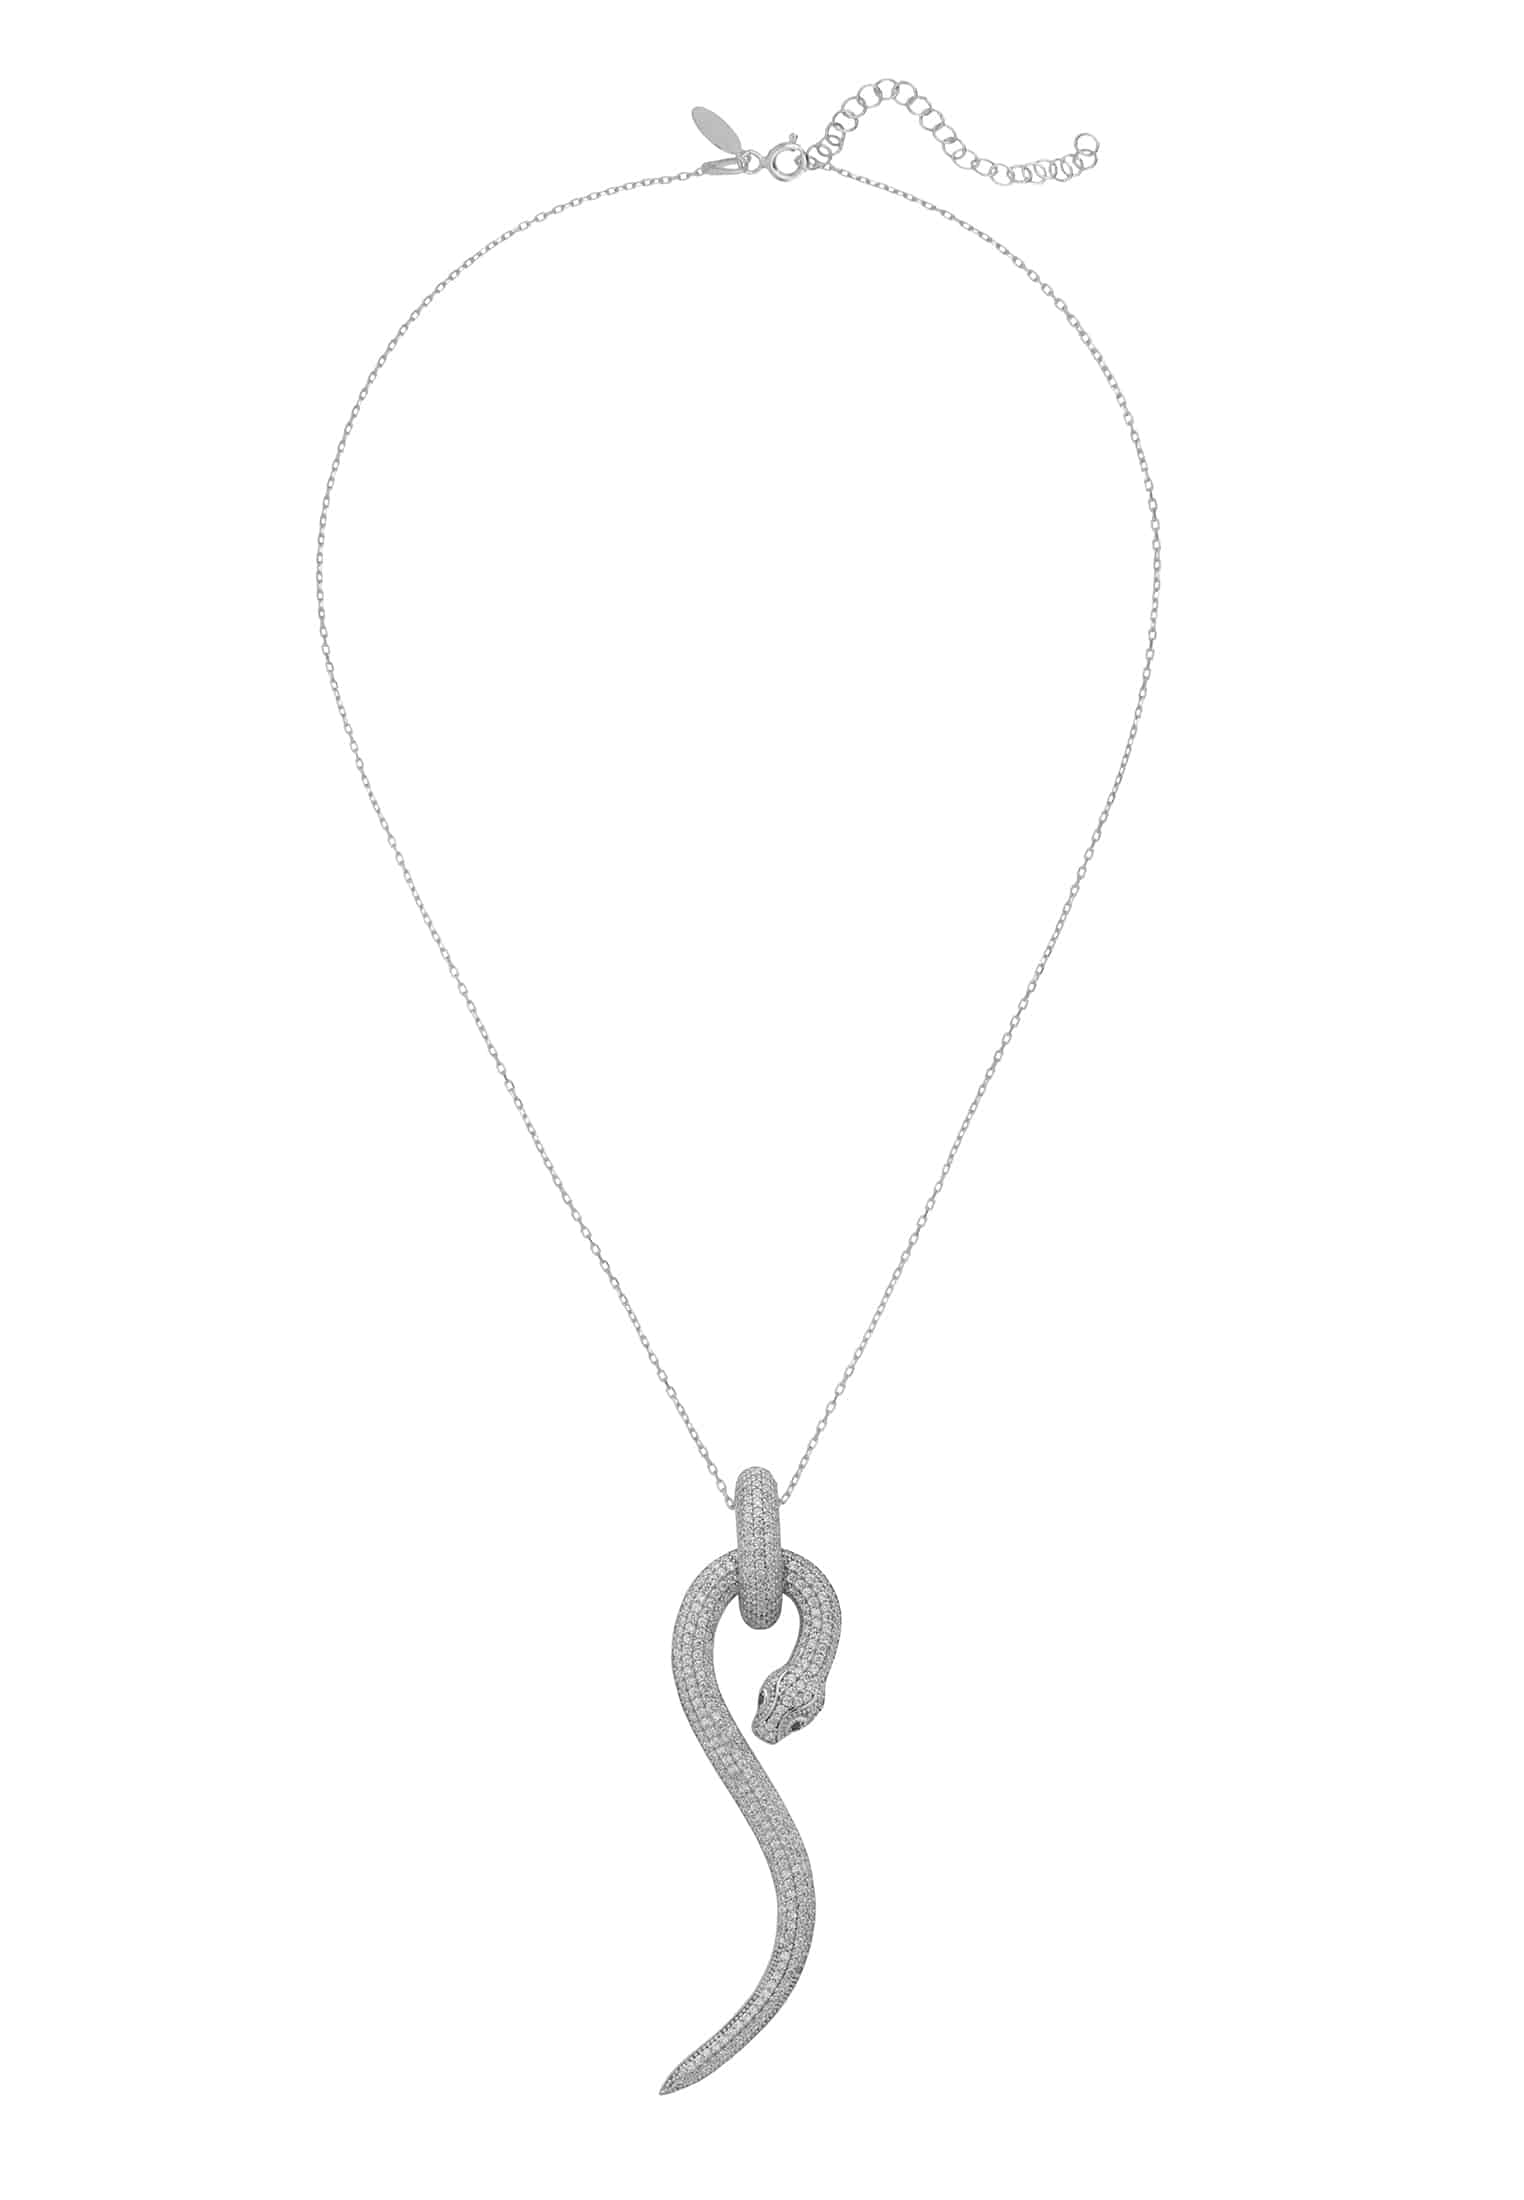 Silver Anaconda Pendant Necklace with Zircon Accents - 925 Sterling Silver Jewelry for Everyday Wear - Jewelry & Watches - Bijou Her -  -  - 